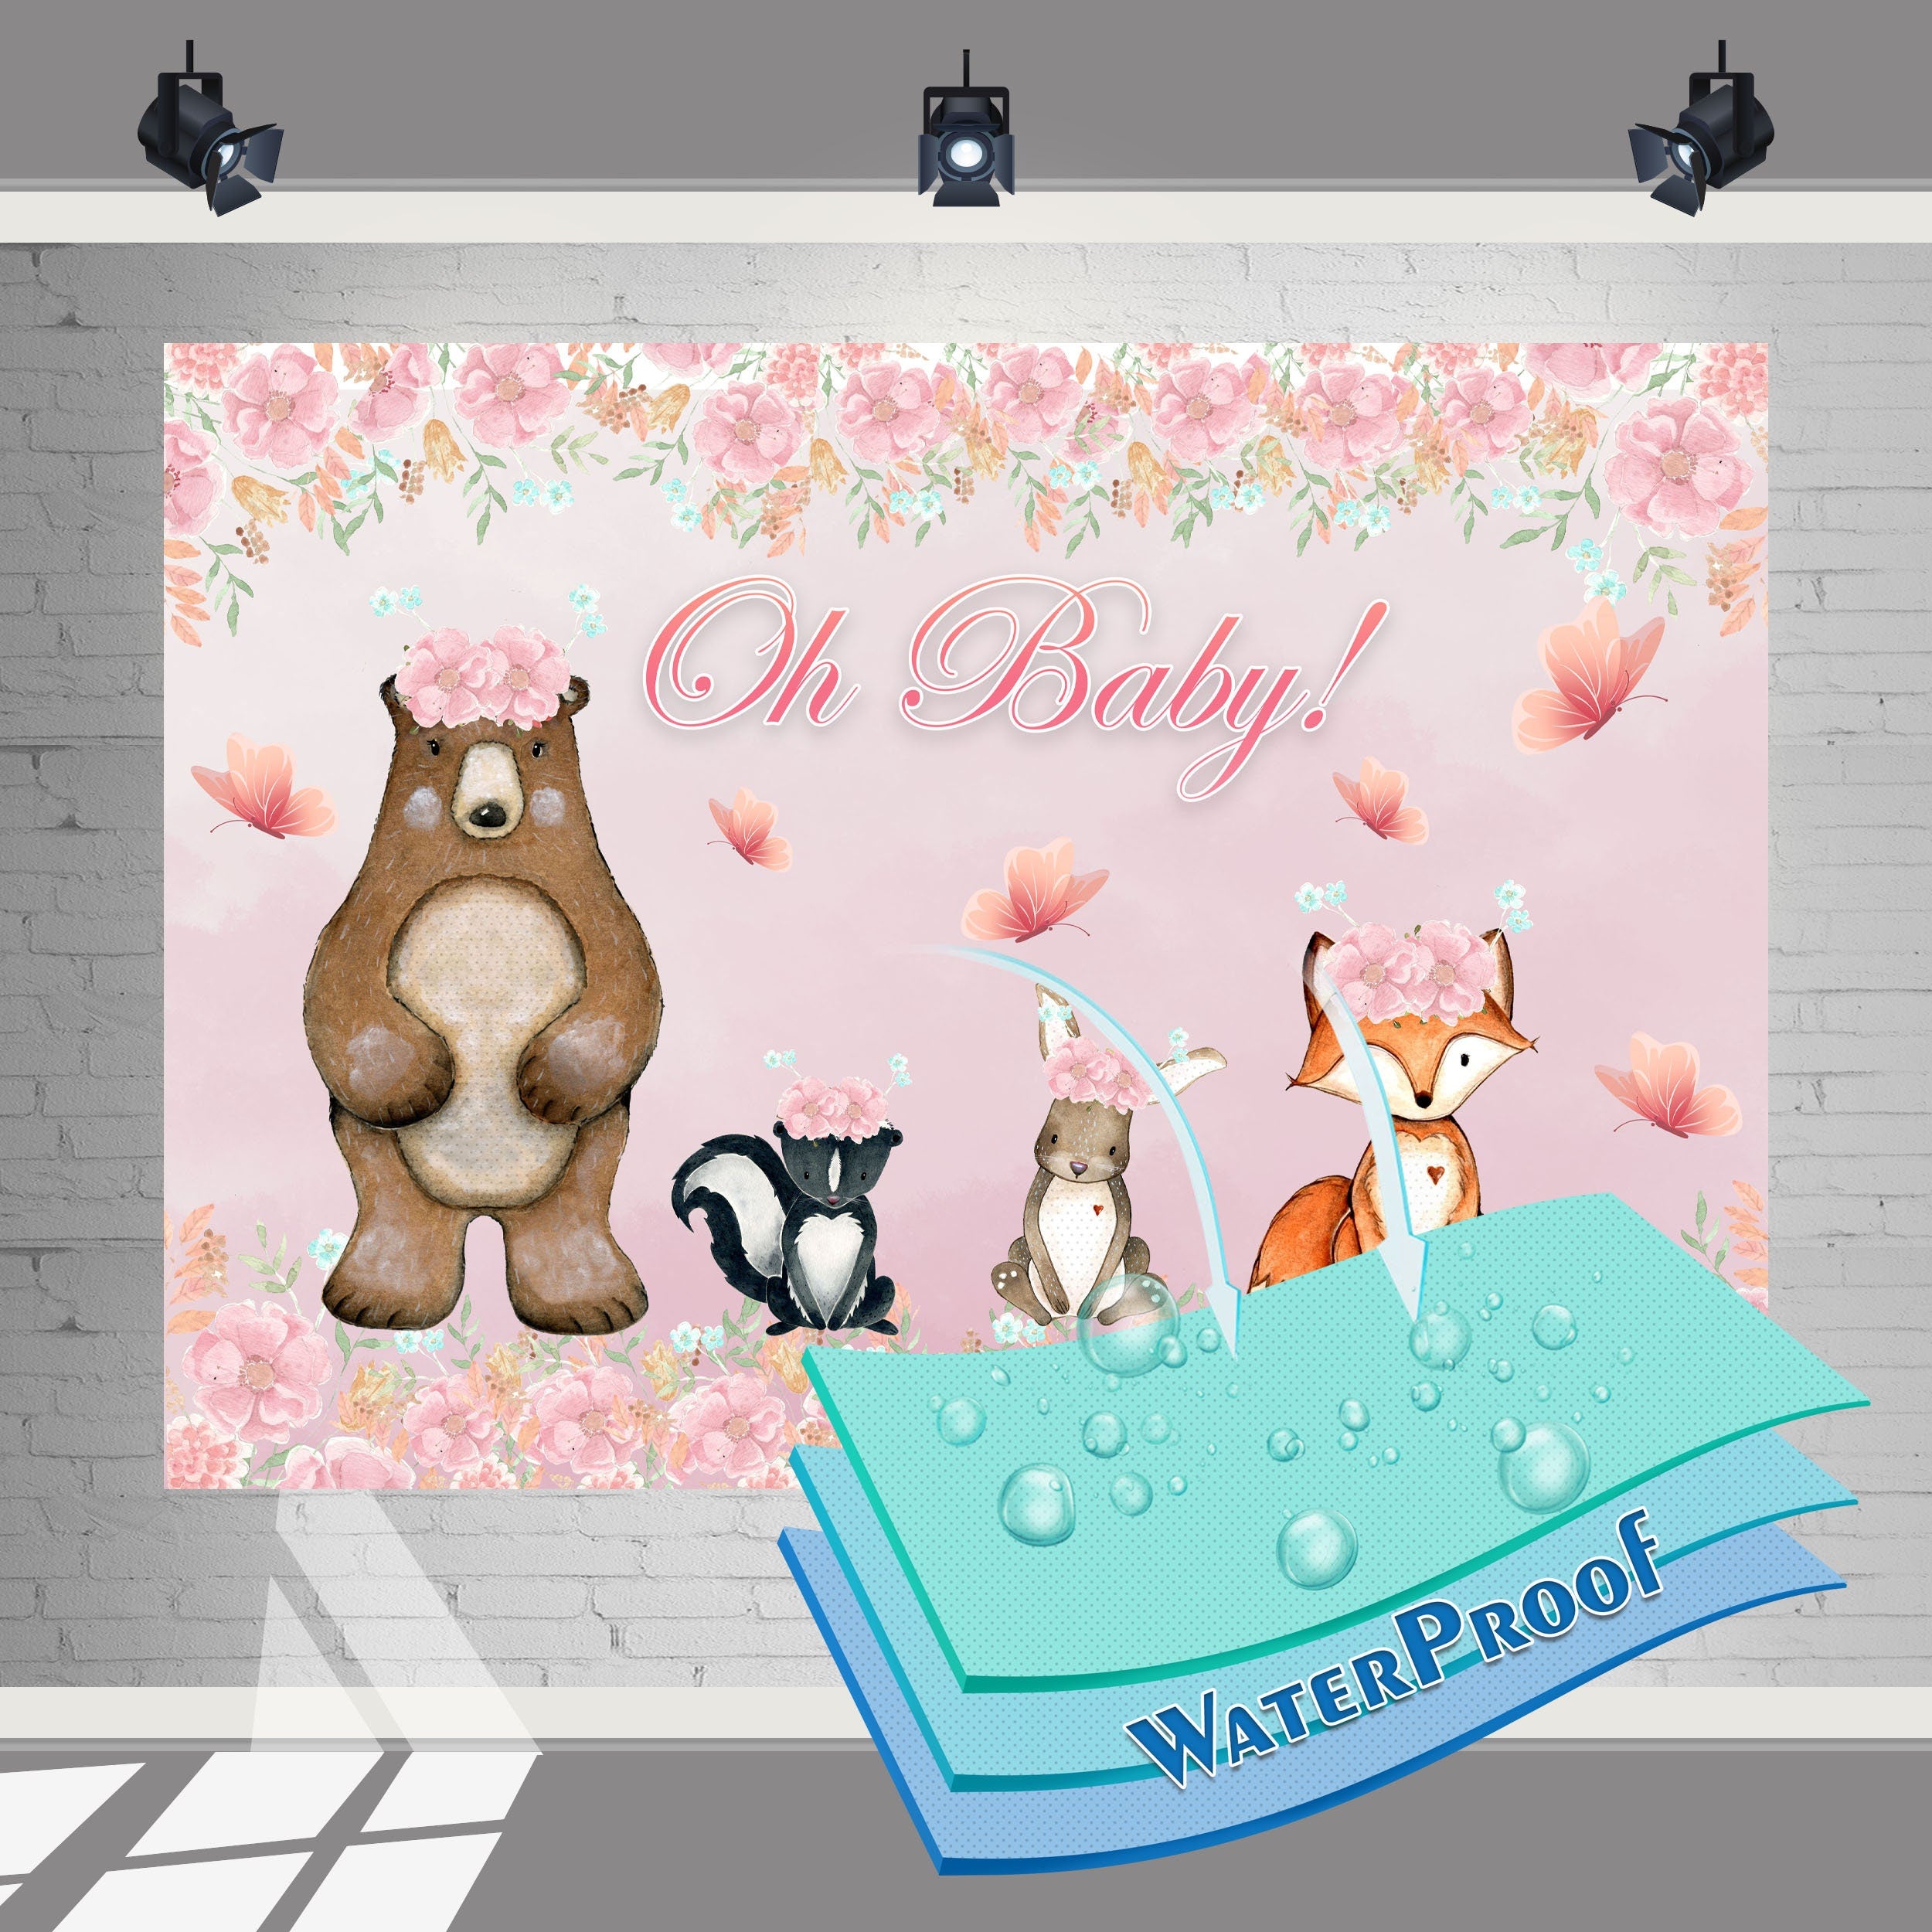 "Oh Baby Woodland" Baby Shower Backdrop 5x3 FT - Enchanting Forest Animals Theme